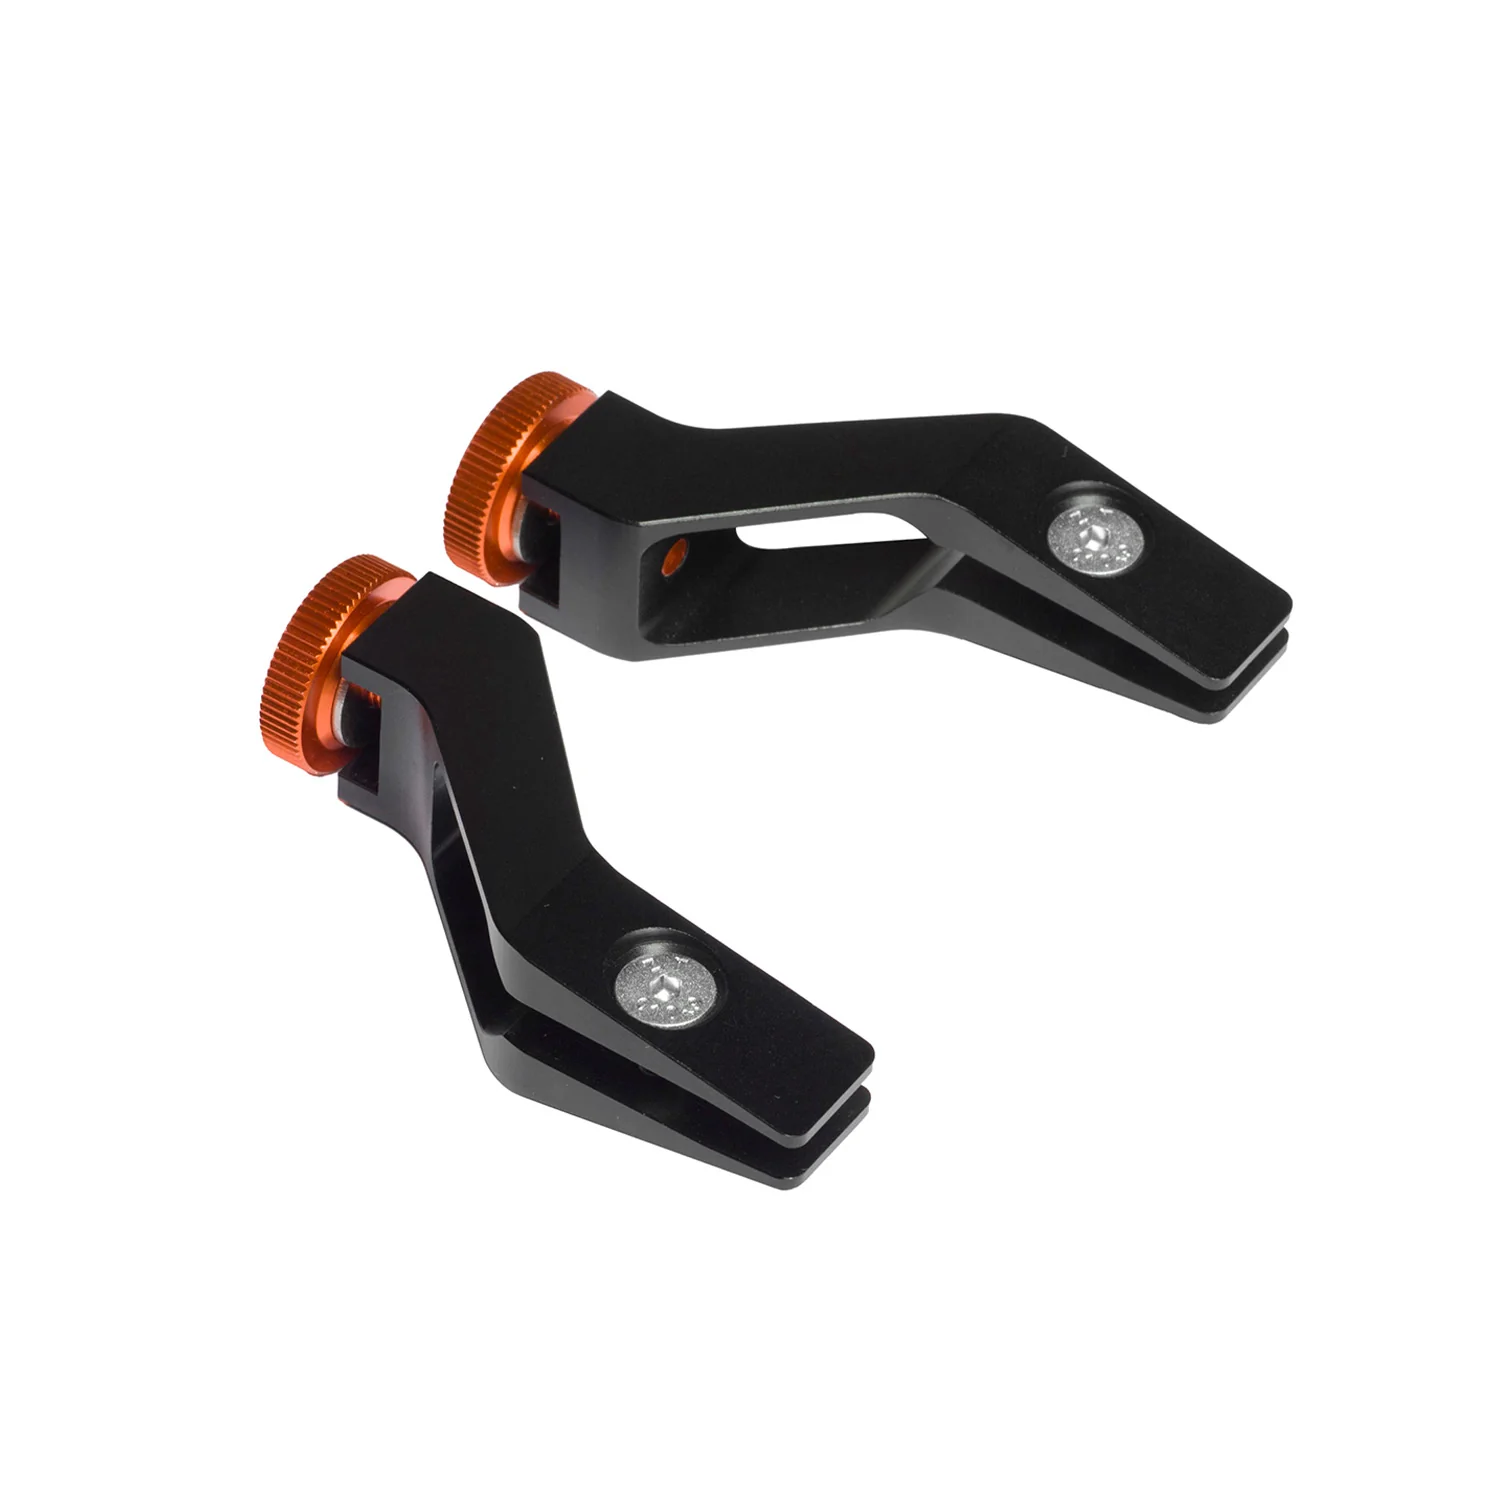 Why are the RS clamps shown with orange screw knobs but the ones I just received are small and silver,